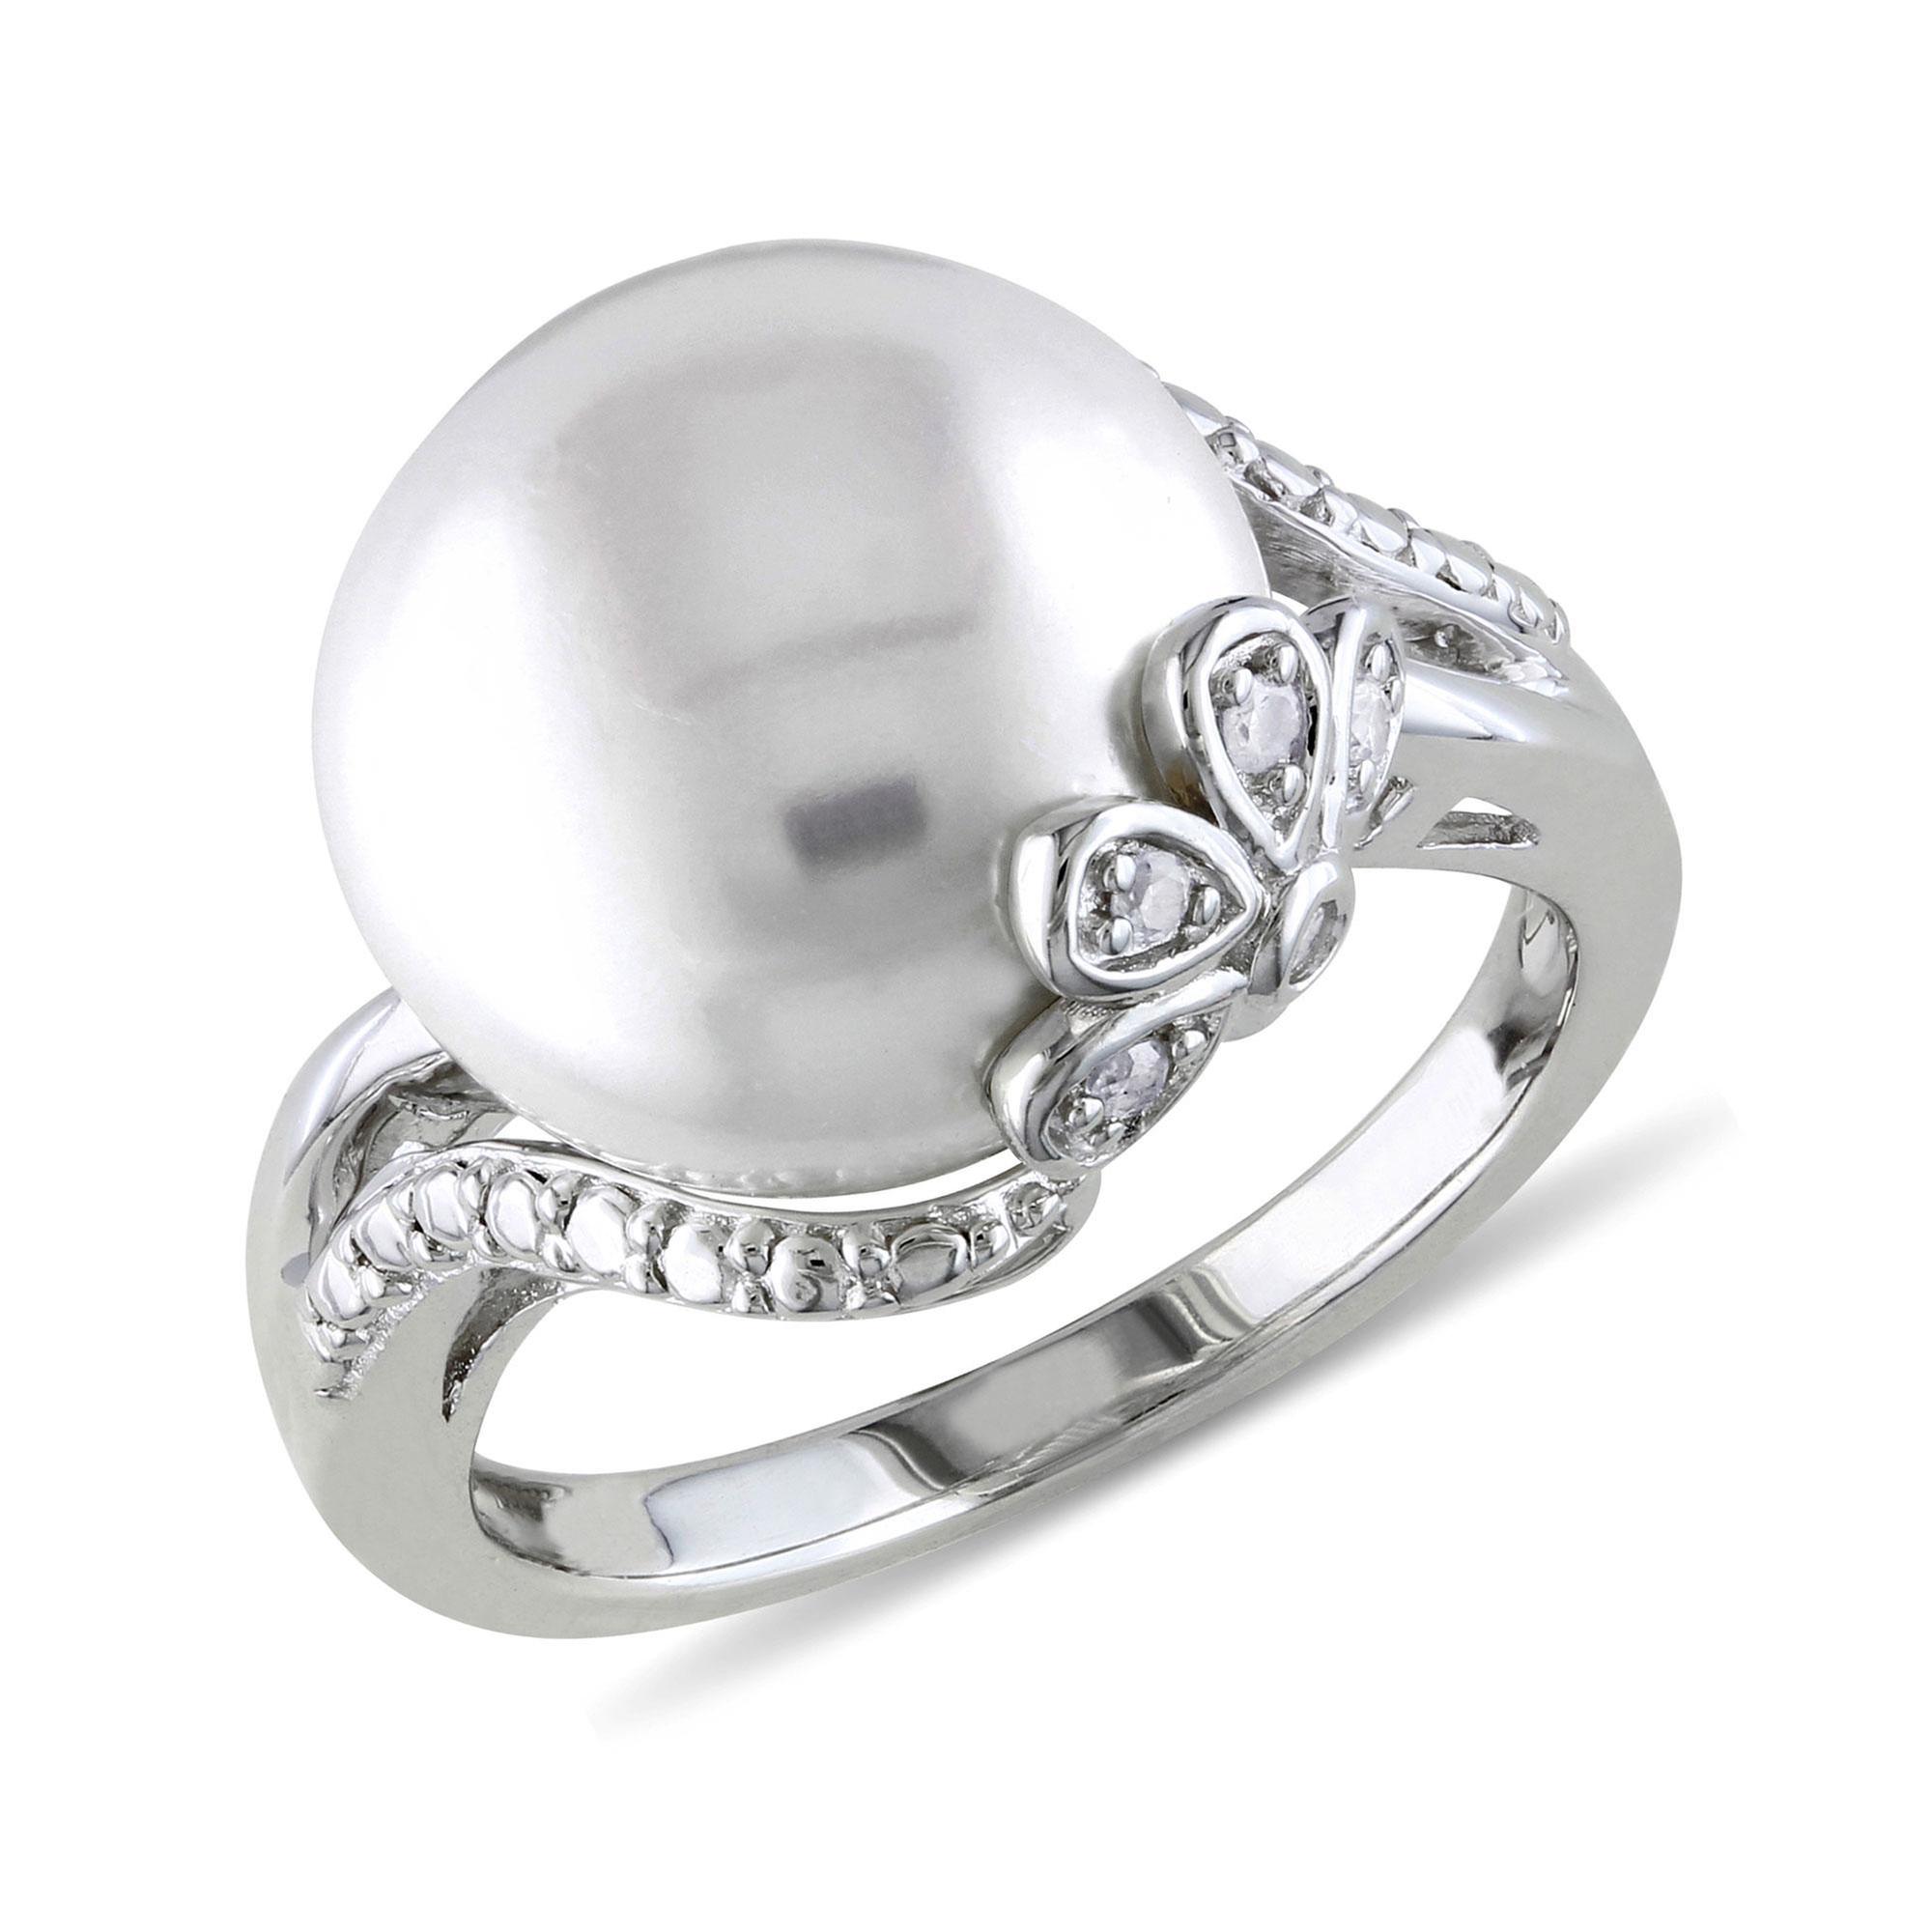 White Freshwater Cultured Pearl and Diamond Sterling Silver Floral Ring 1/20ctw- Size 7